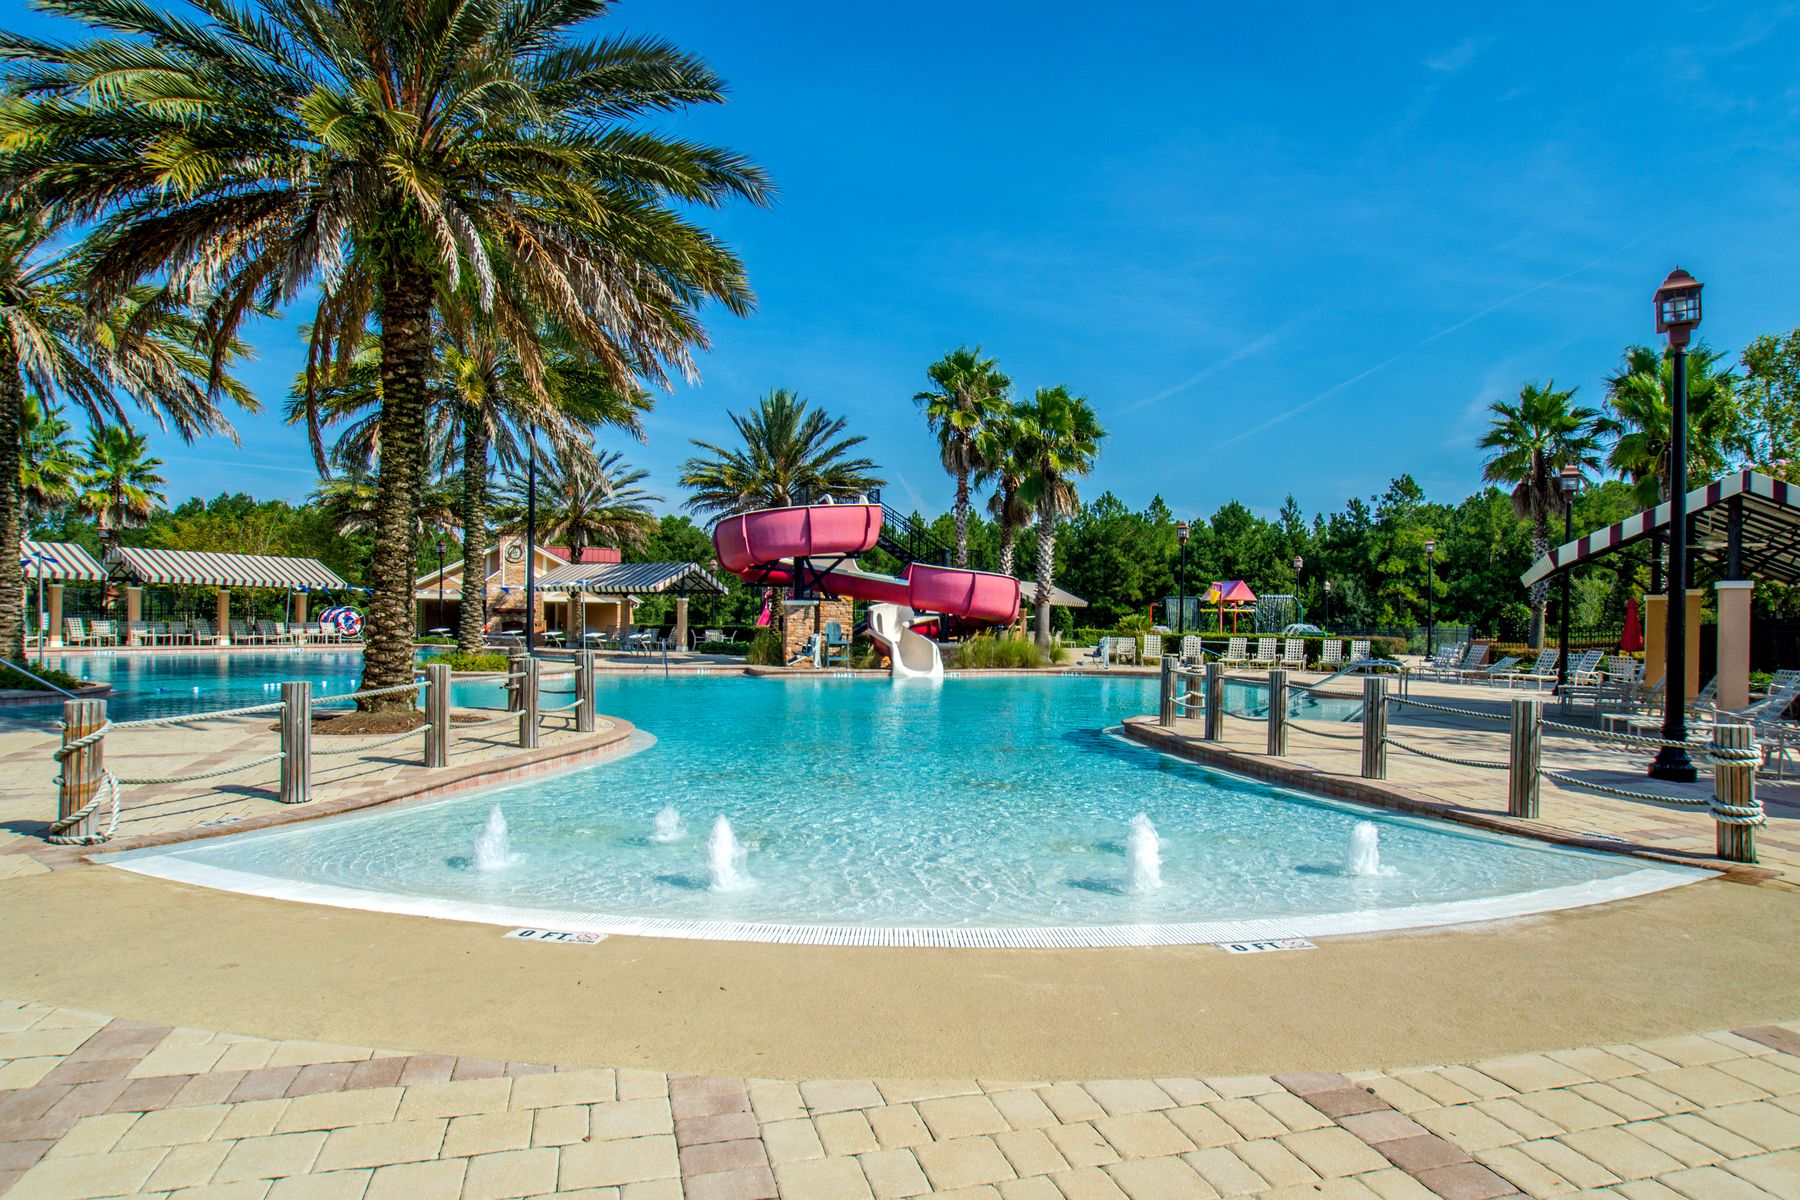 Pool:Enjoy a day with the kids at our resort style pool